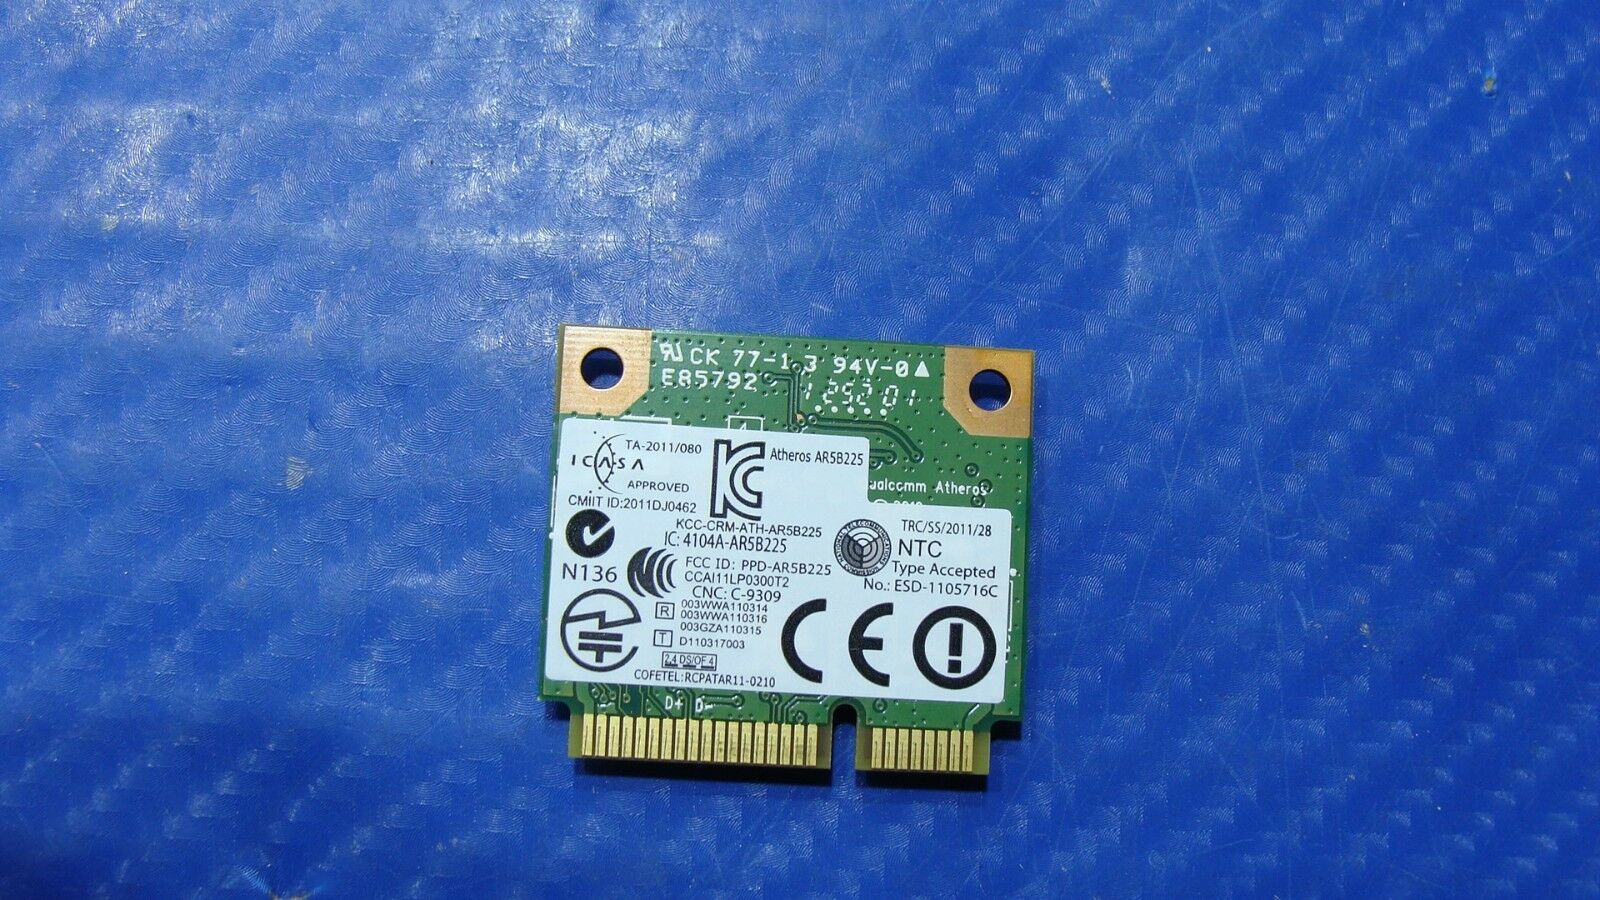 Dell Inspiron One 2330 23